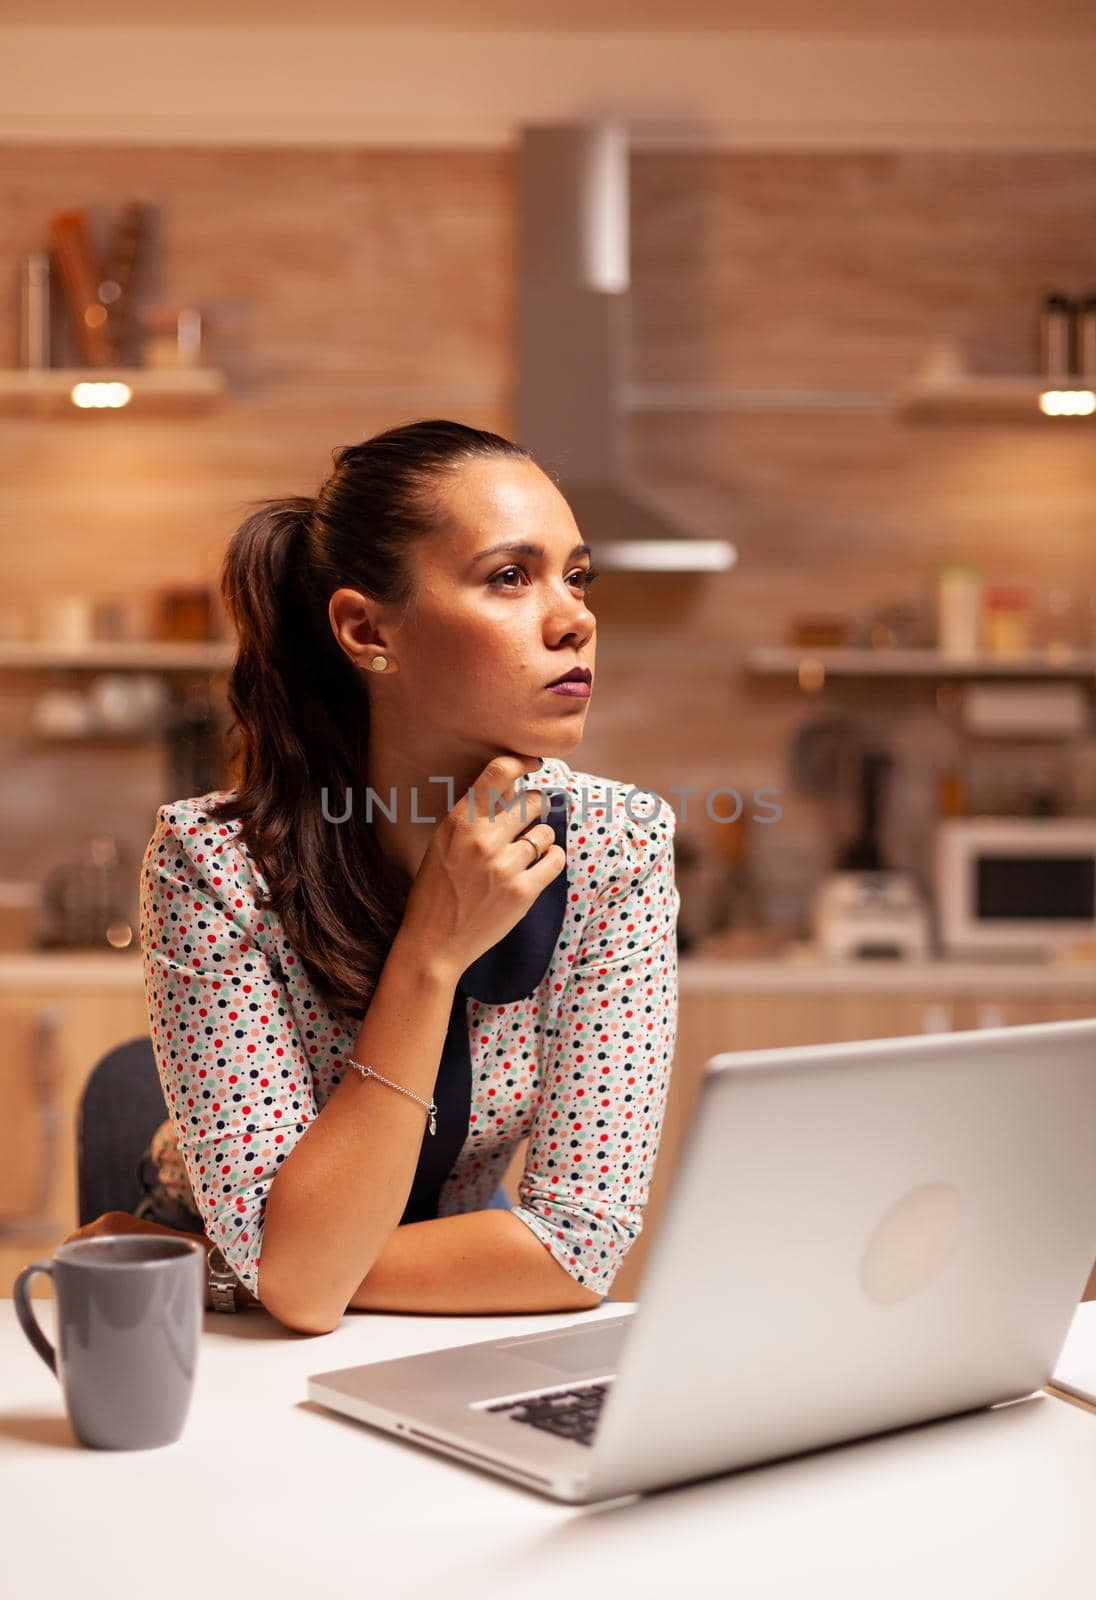 Concentrated businesswoman in home kitchen by DCStudio